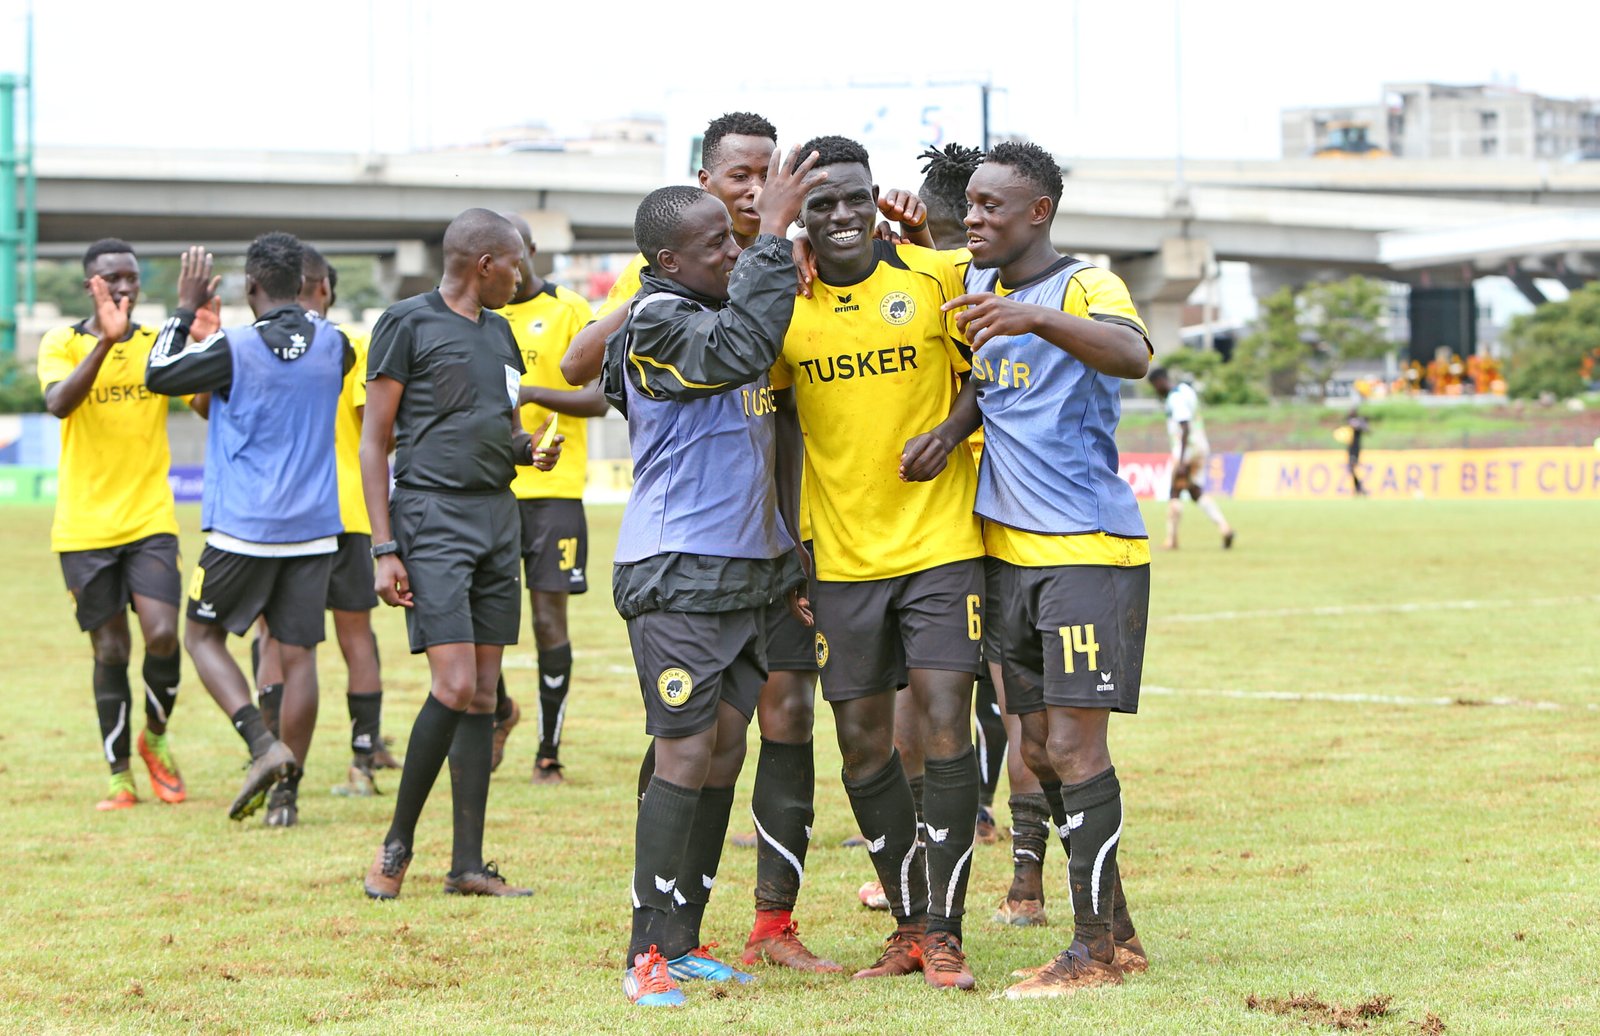 Tusker FC players celebrate one of their goals